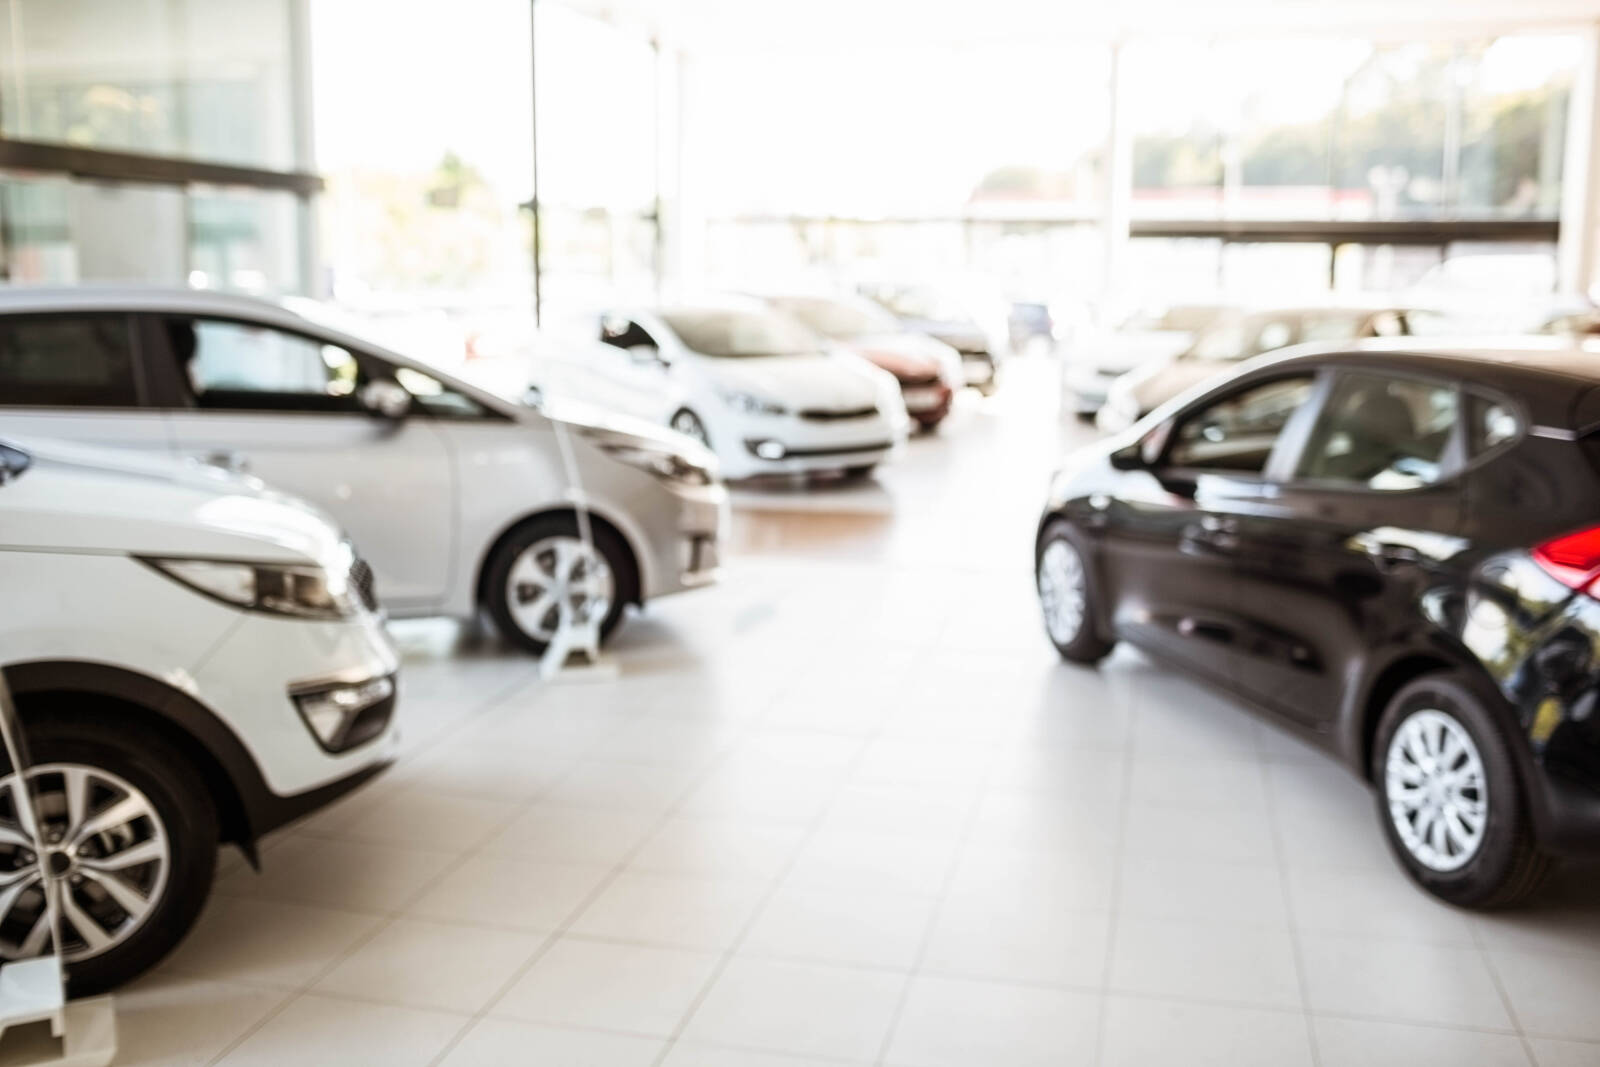 To help keep the economy moving in the right direction, B.C.’s New Car Dealers advocate for policy and funding decisions that help encourage consumer spending and support jobs, and incentivize consumers through EV and charging equipment rebates.